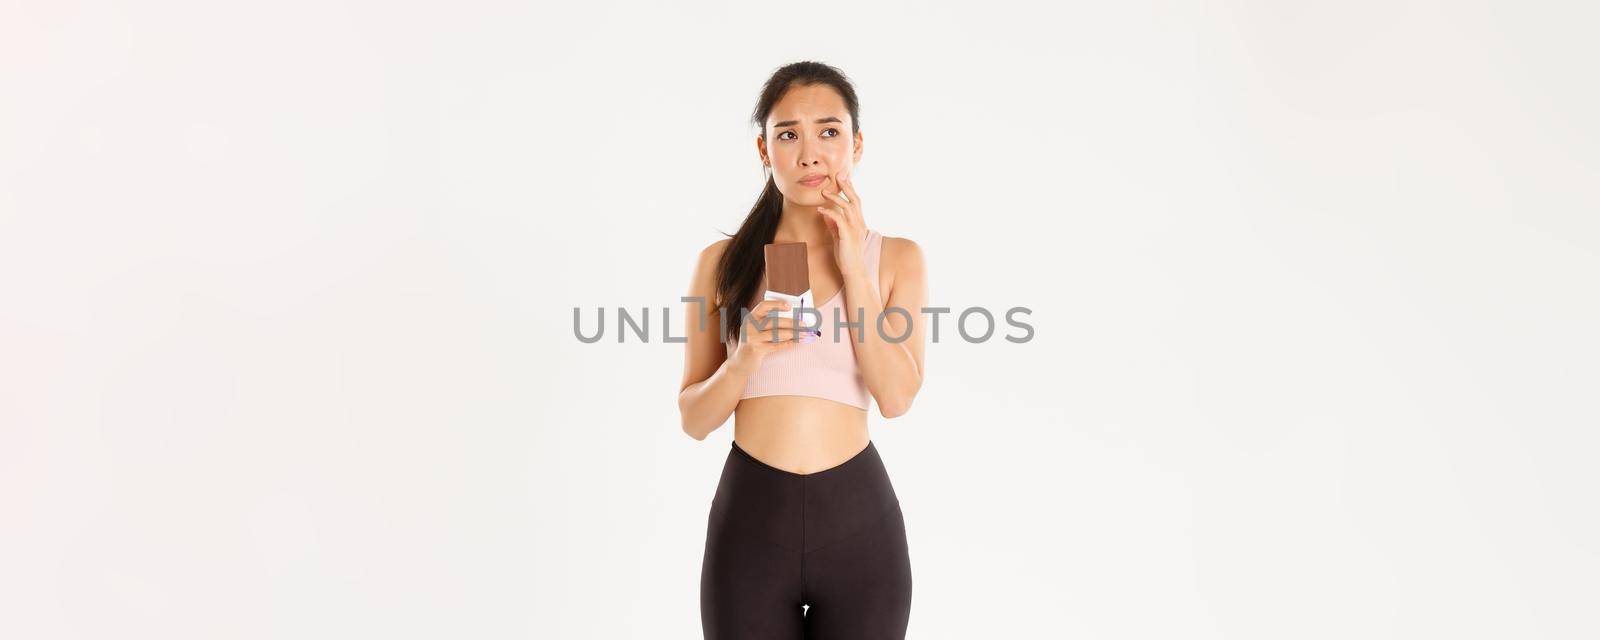 Sport, wellbeing and active lifestyle concept. Doubtful and indecisive asian fitness girl holding chocolate bar and thinking about eating it, looking away hesitant, worried about calories.